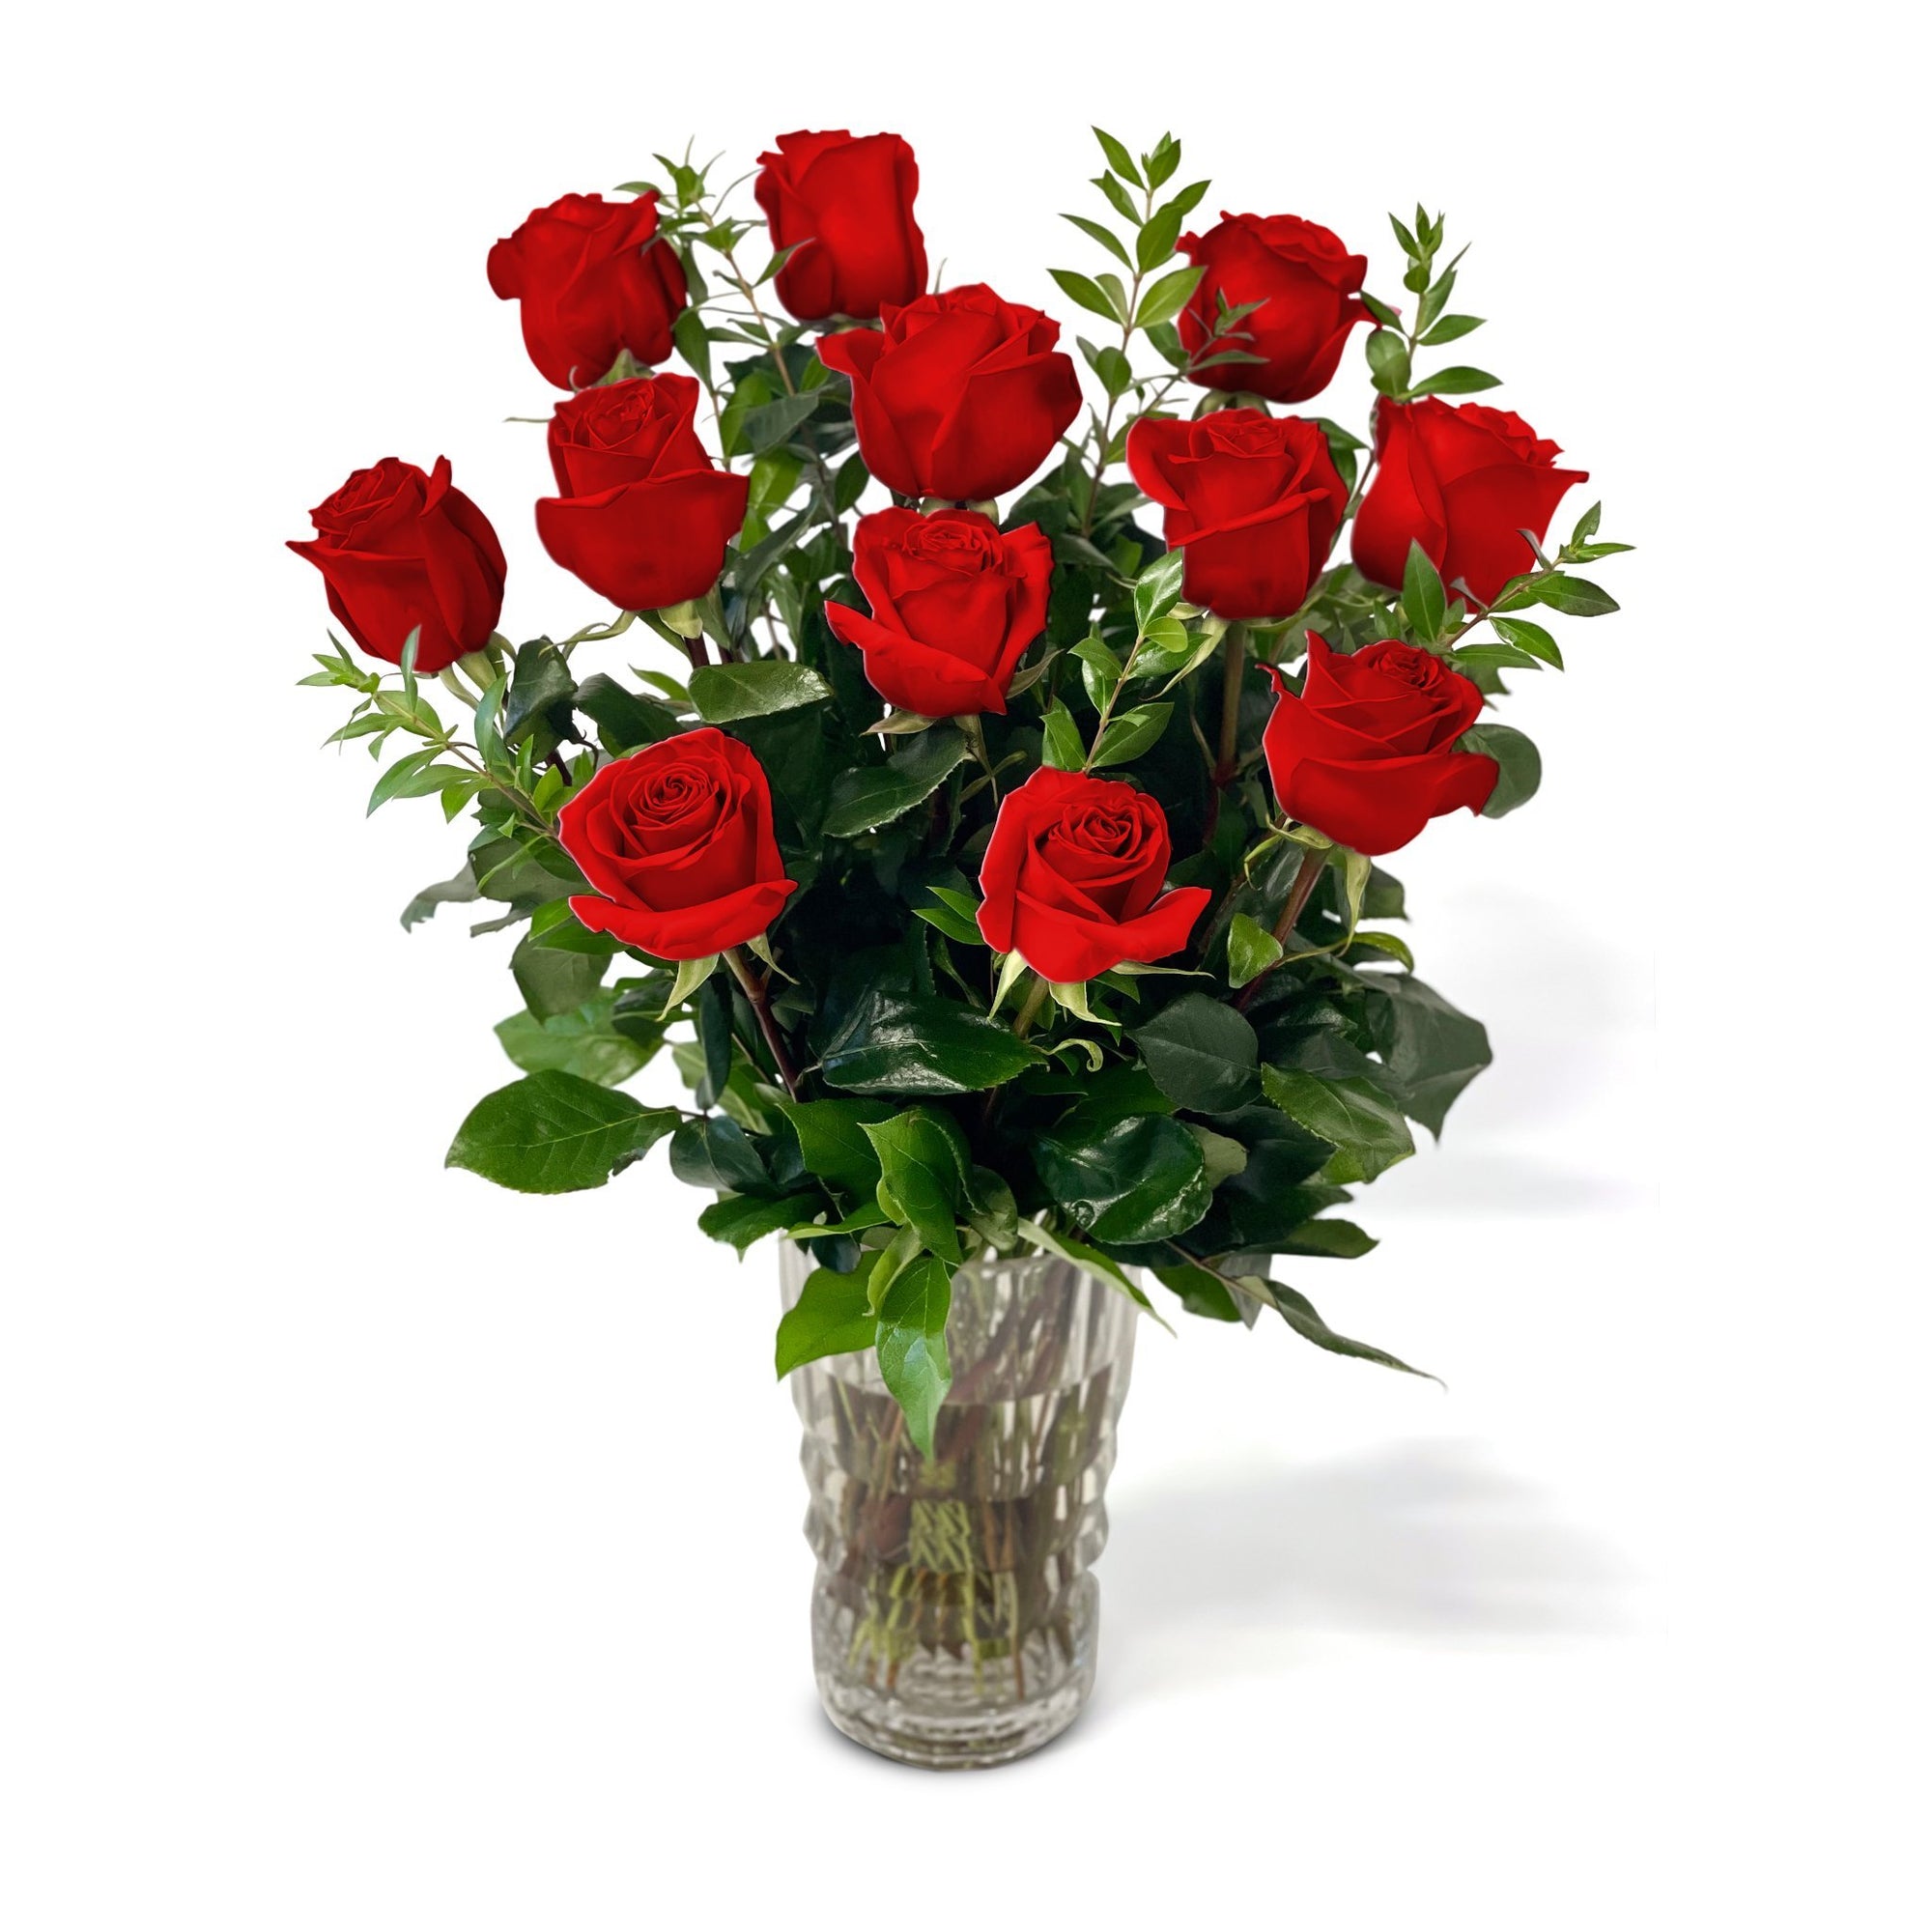 Queens Flower Delivery - Fresh Roses in a Crystal Vase | Red - 1 Dozen